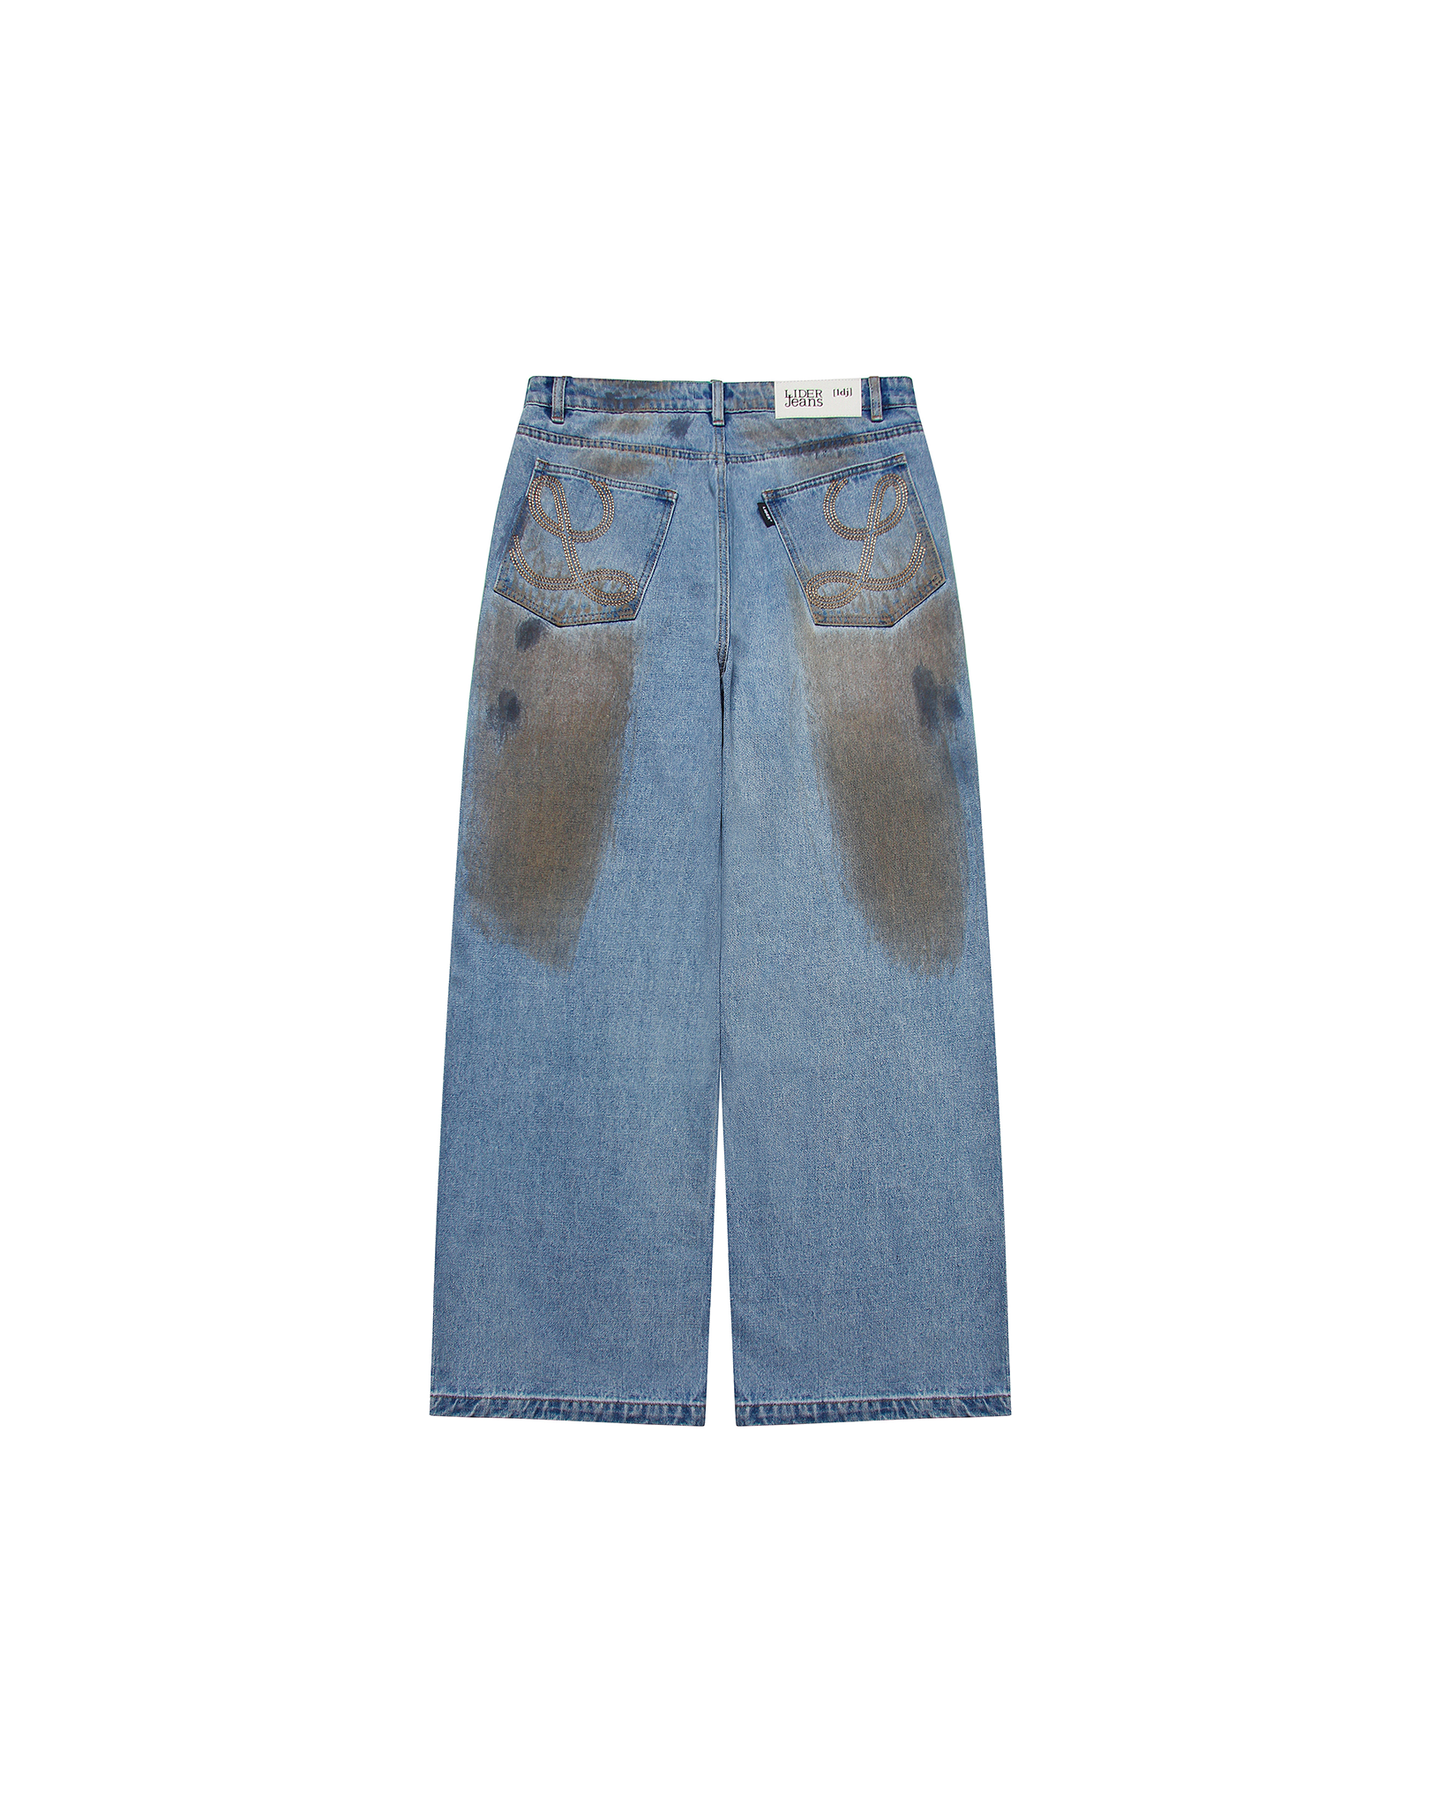 unearthed-washed-jeans-LIDER